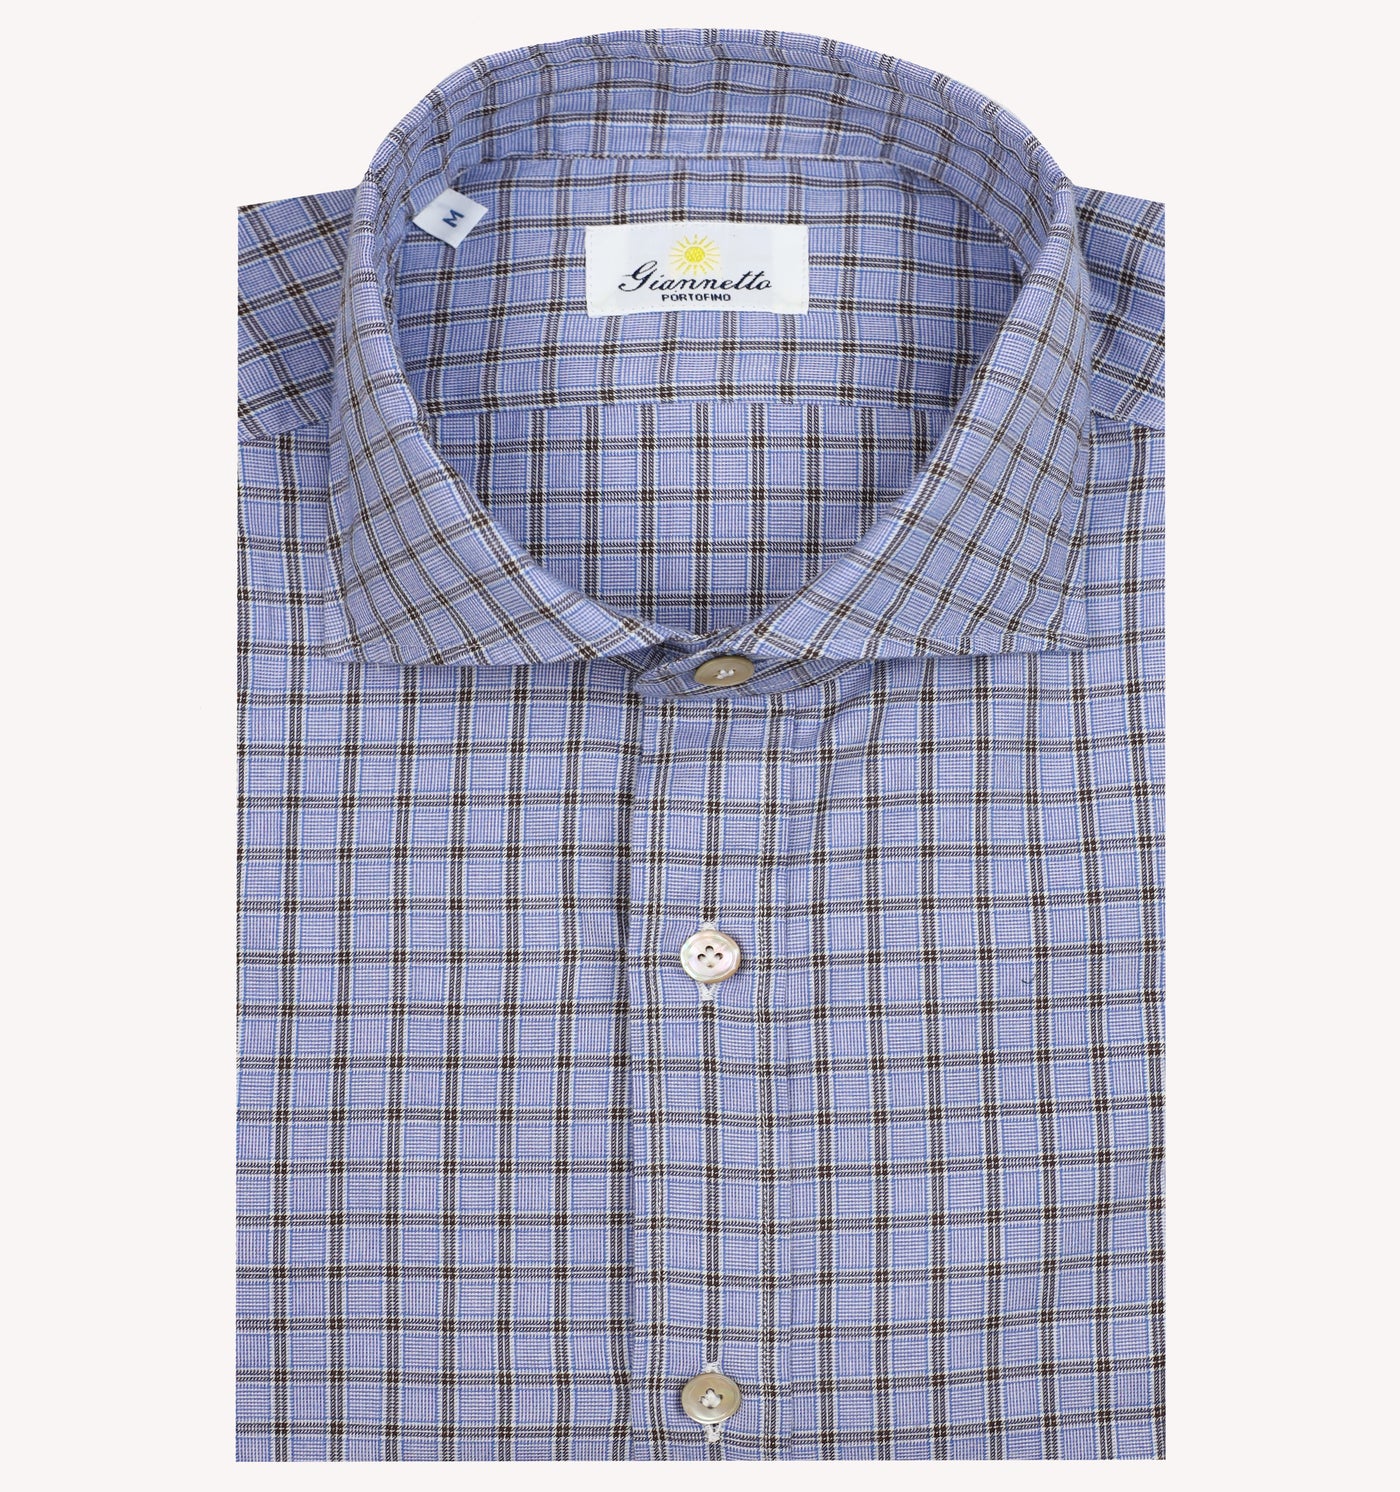 Giannetto Check Sport Shirt in Blue Chocolate